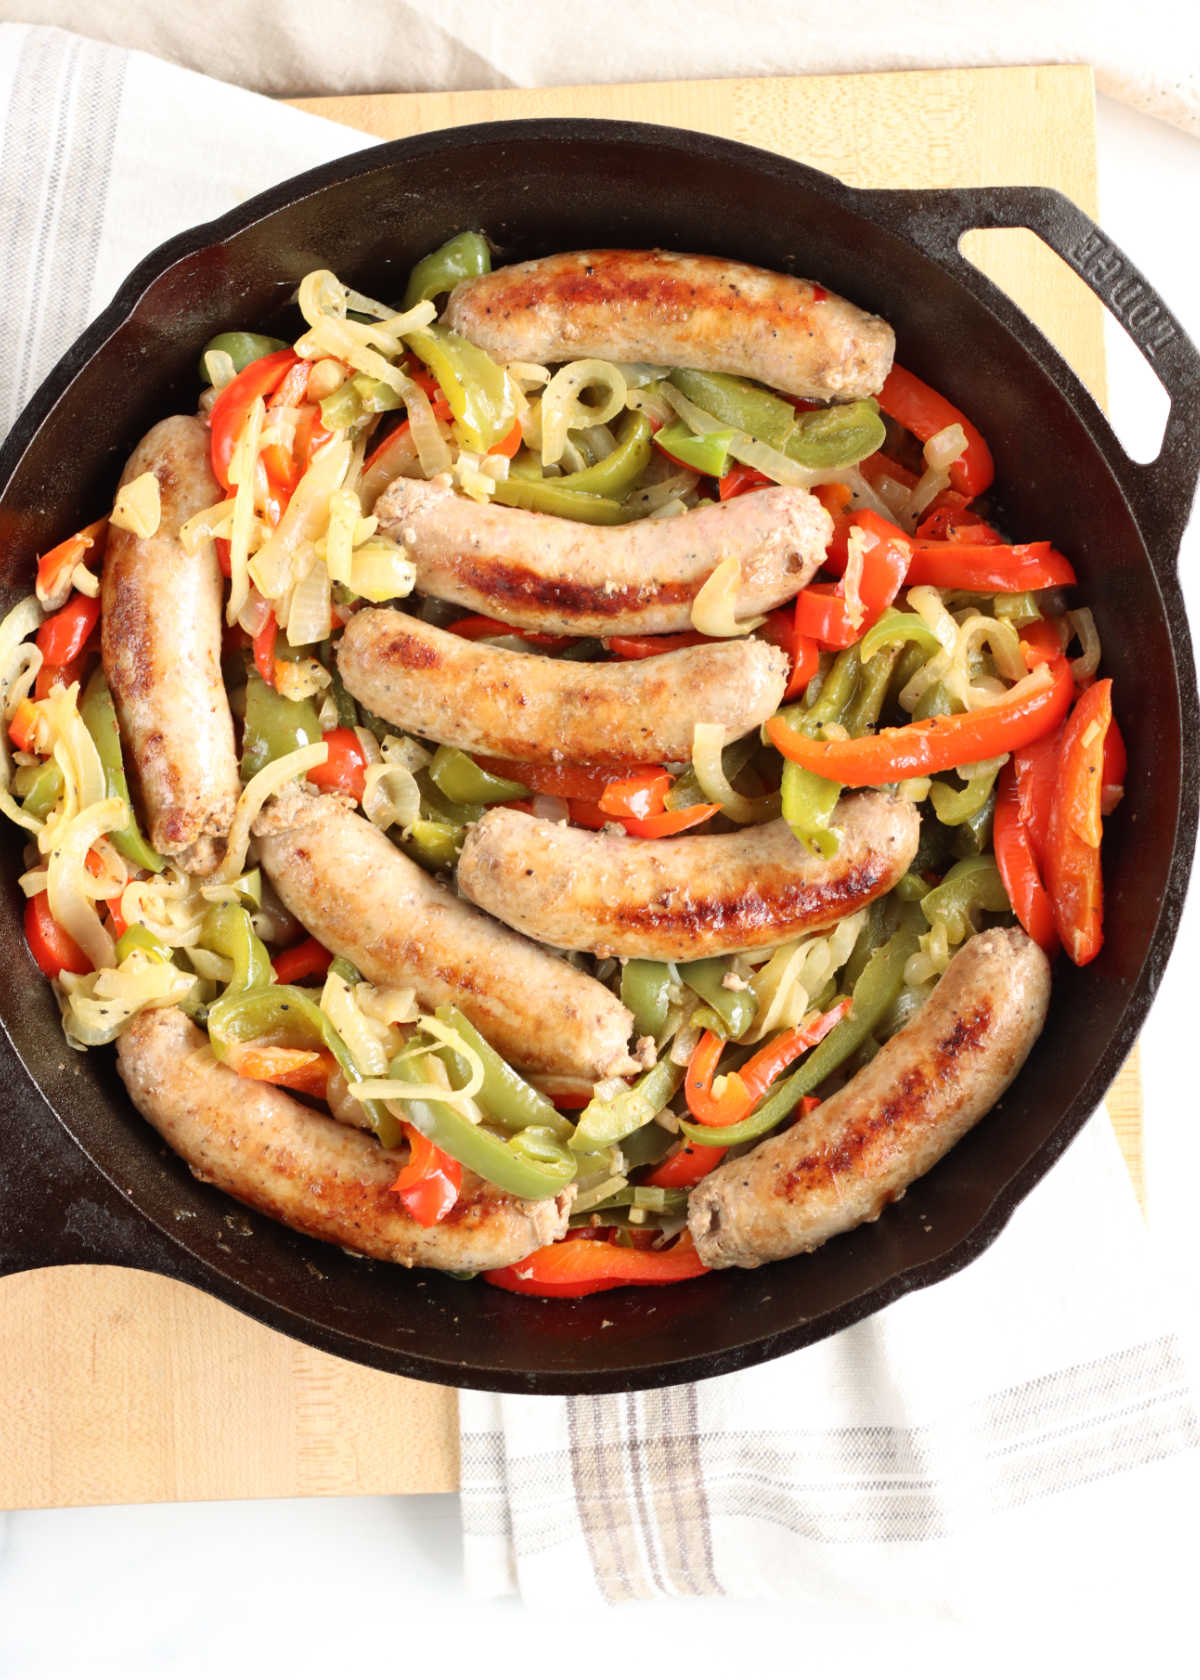 Browned sausage links, peppers, onions in cast iron skillet on wooden cutting board.